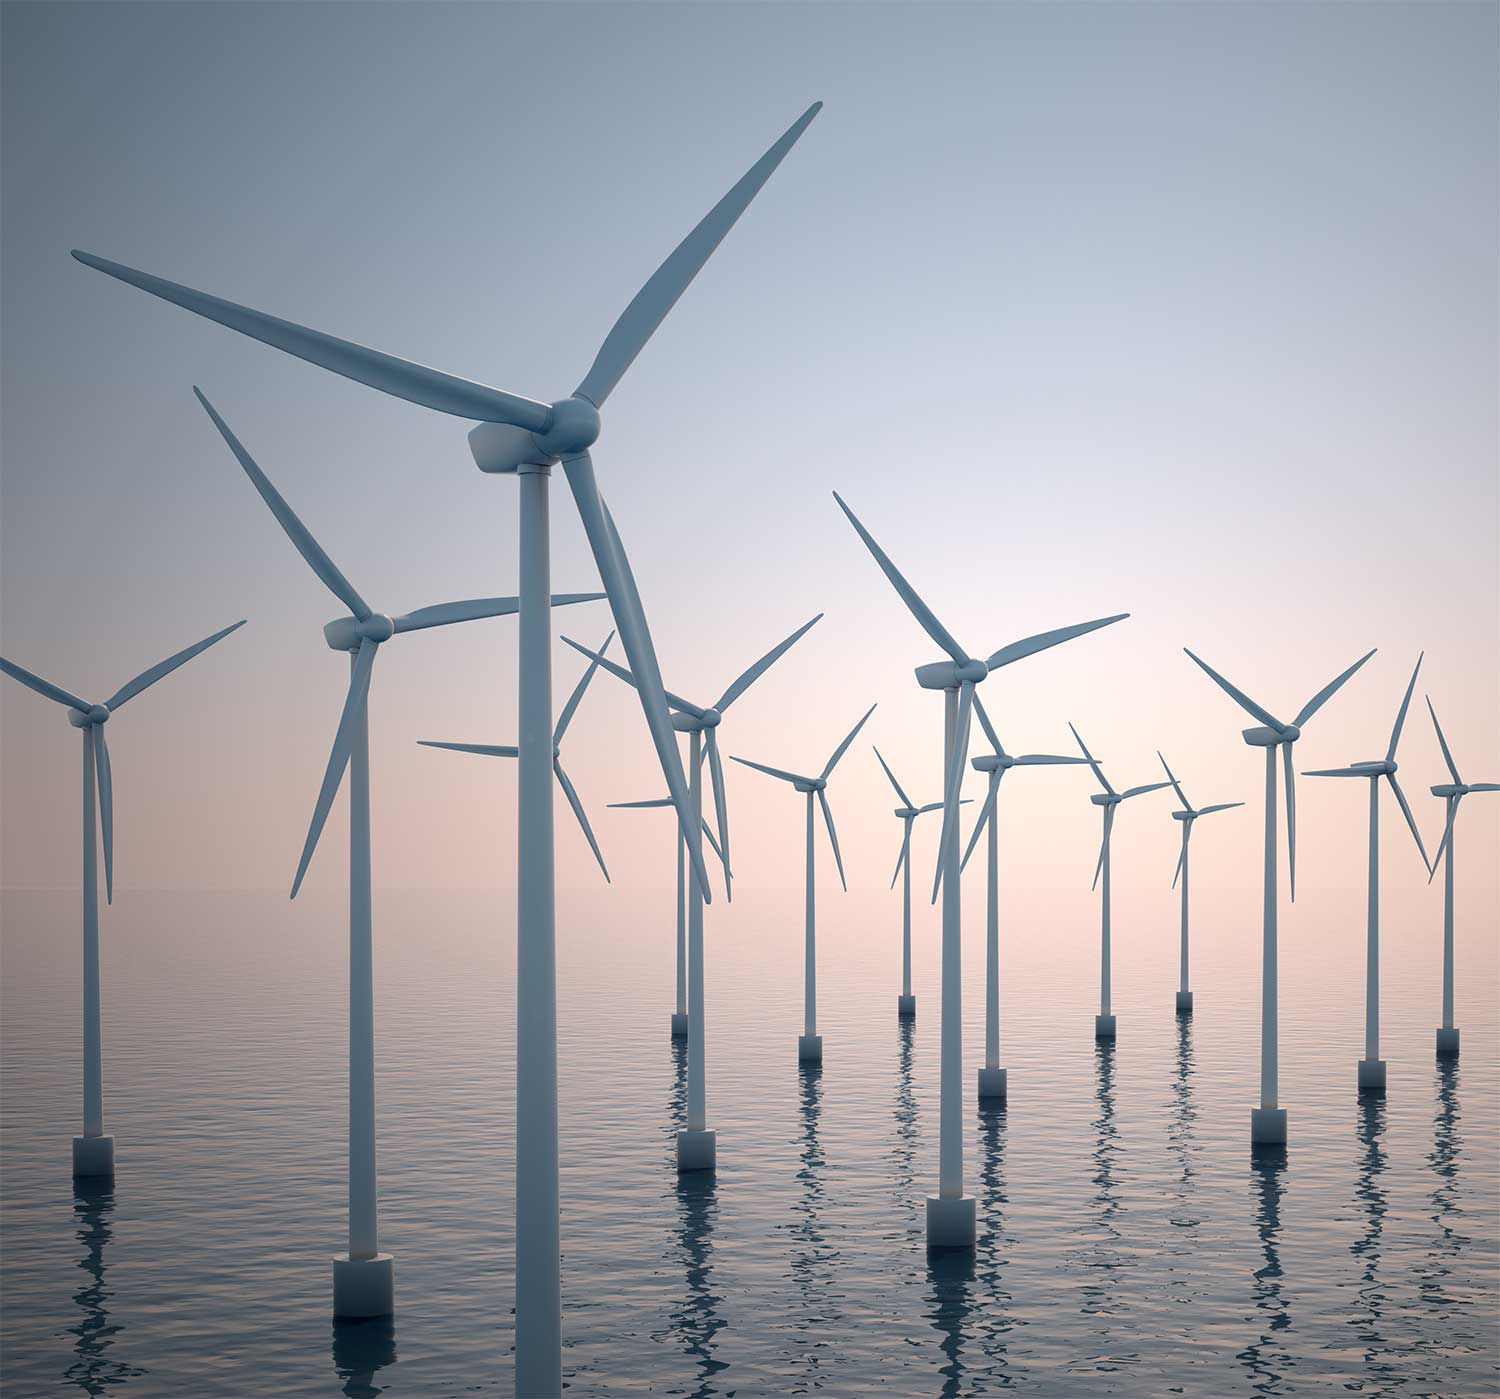 Coalition of Six Companies to Fast-Track Offshore Wind in the Philippines